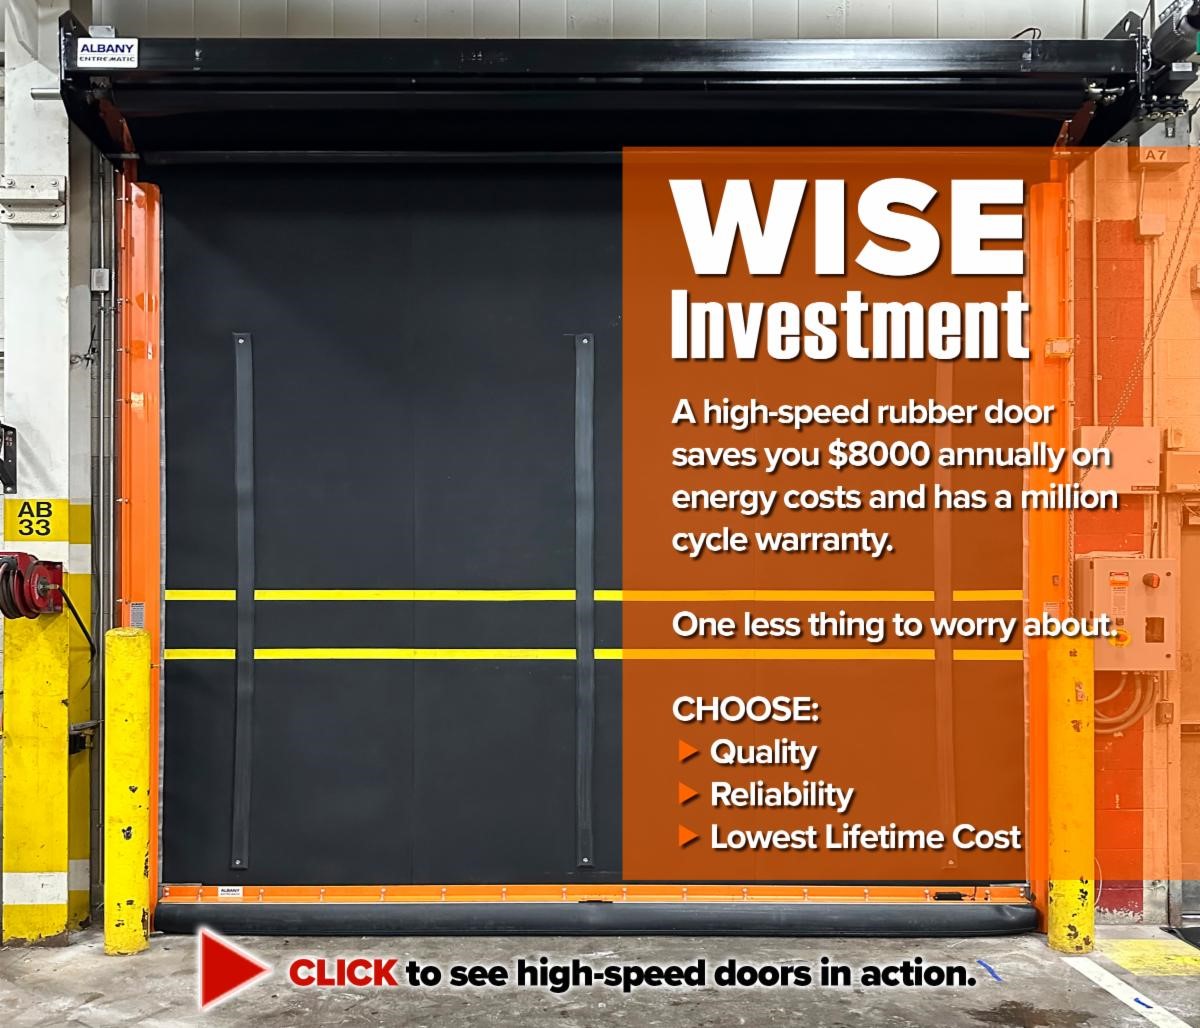 High Speed Albany Door Installed, with the following text